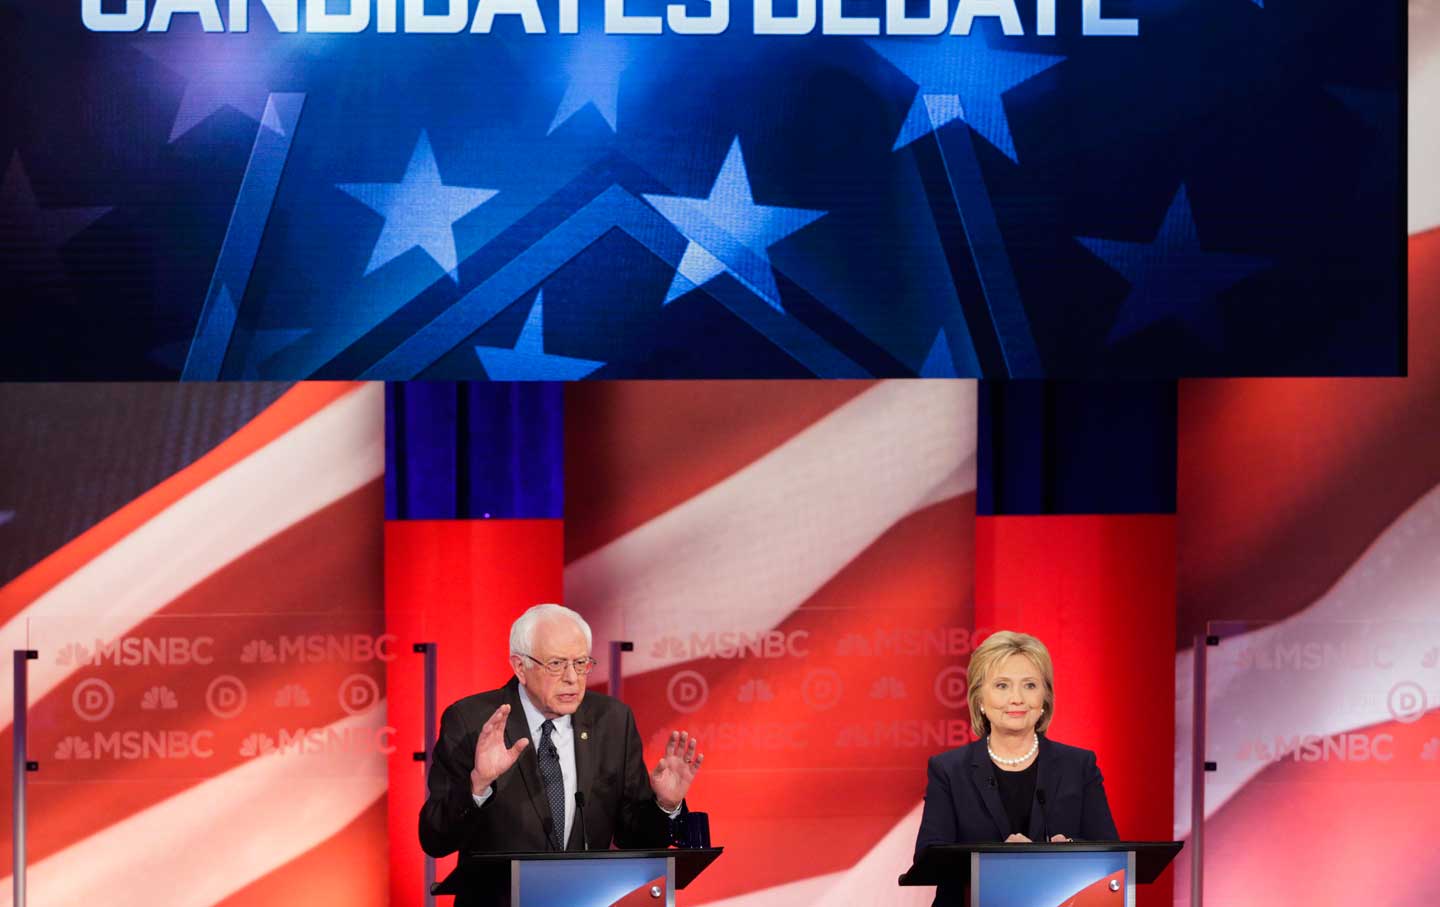 3 Questions Bernie Sanders and Hillary Clinton Should Answer at Tonight’s Debate